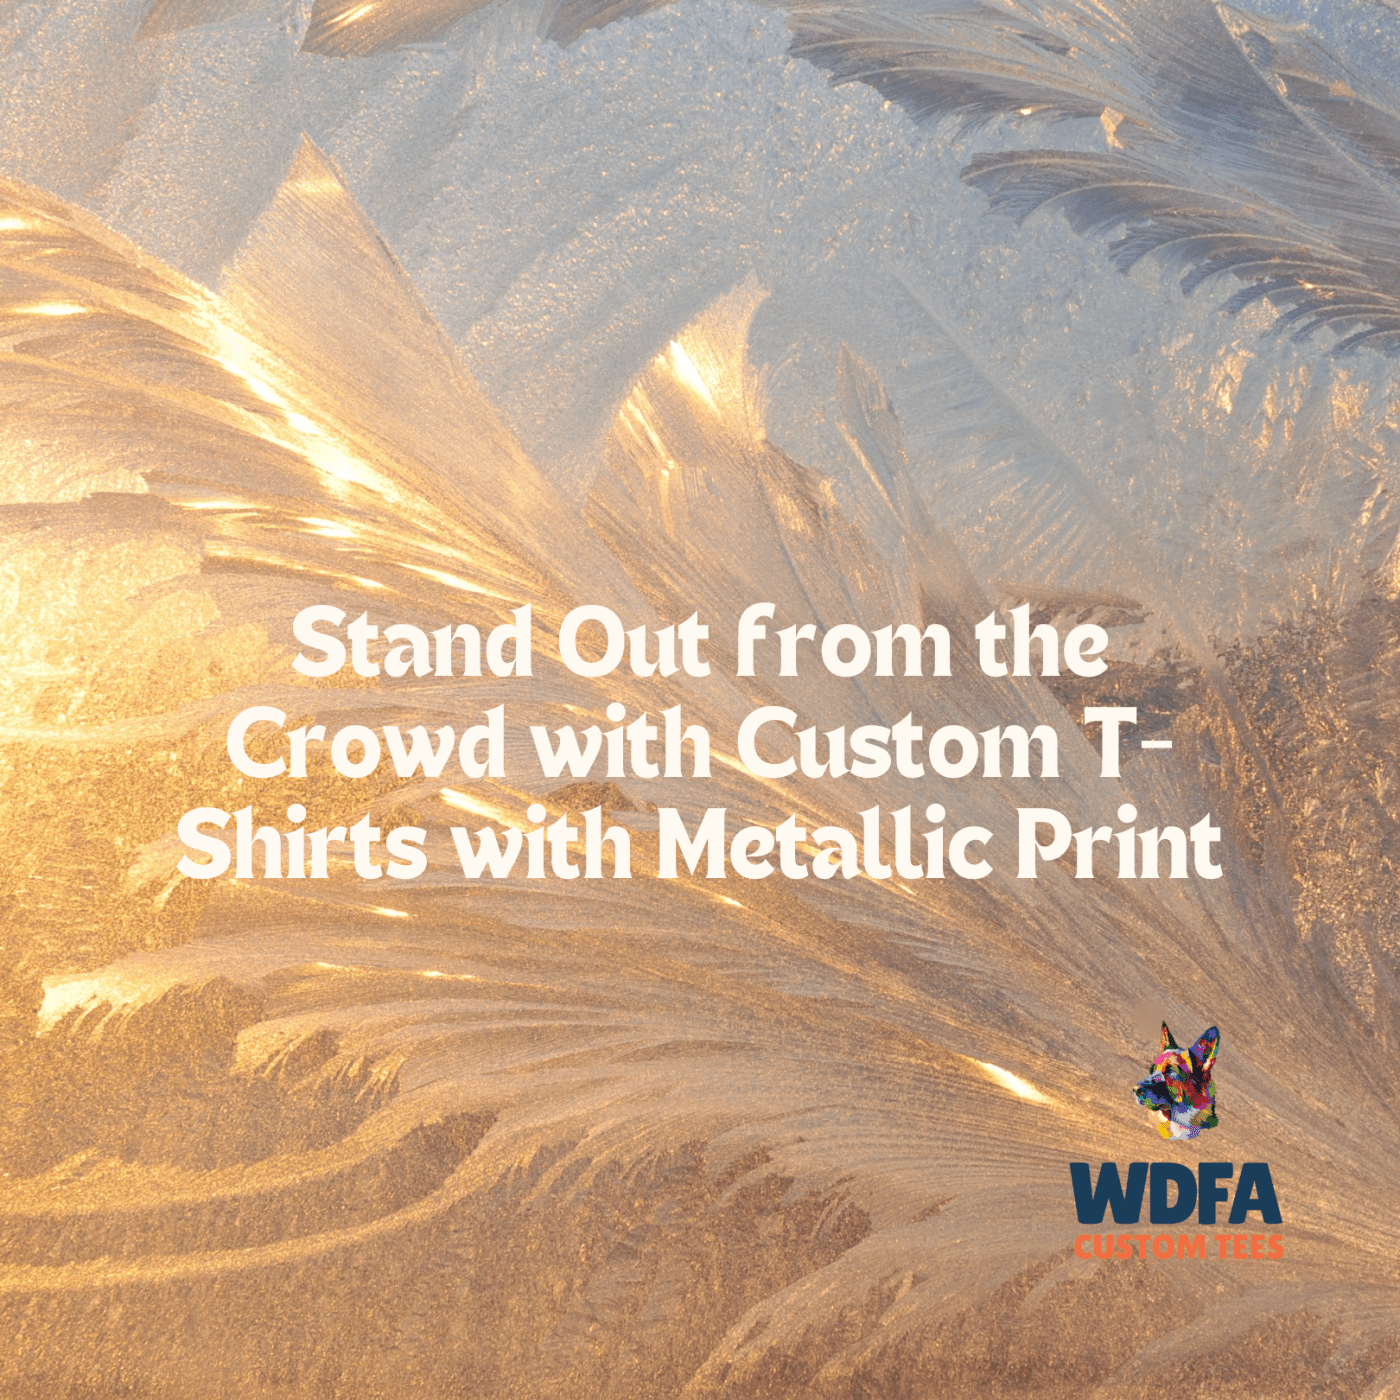 Stand-Out-from-the-Crowd-with-Custom-T-Shirts-with-Metallic-Print, custom t-shirts, custom t shirts, t-shirt printing, t shirt printing.